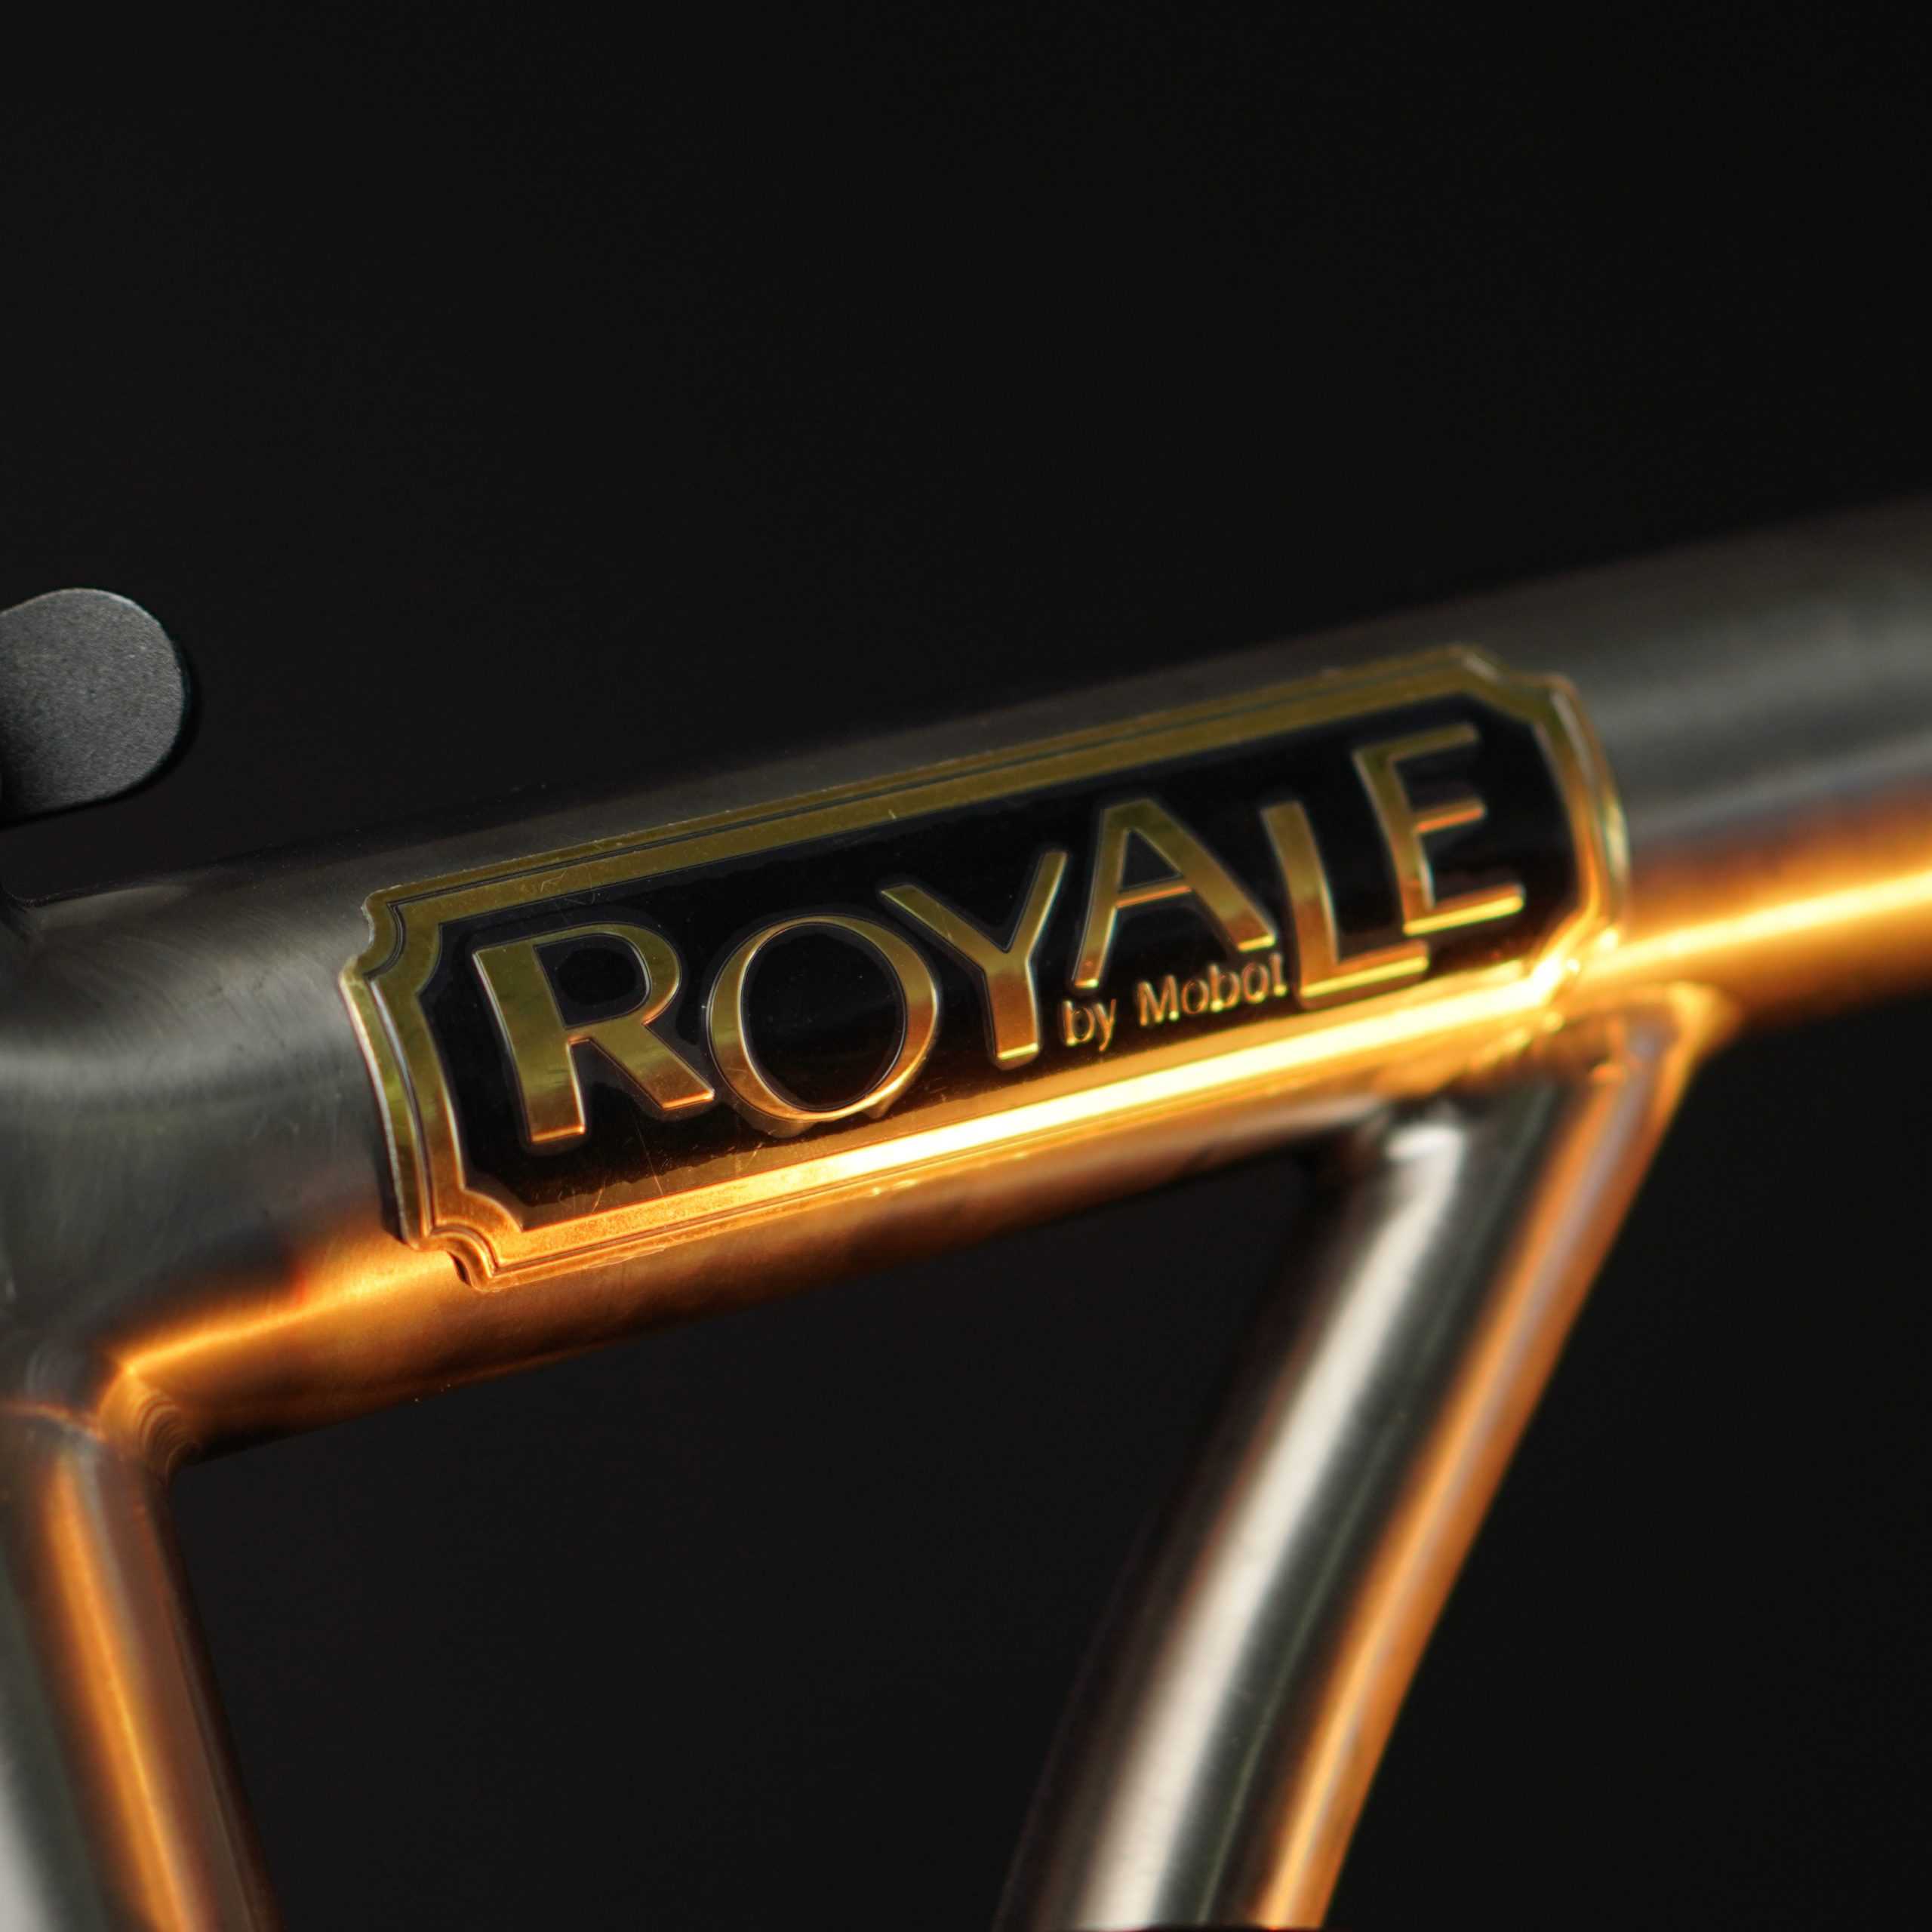 RoyaleGrade9TitaniumFrame scaled - Launch of Royale by Mobot 7.6kg Titanium Tri-fold bicycle